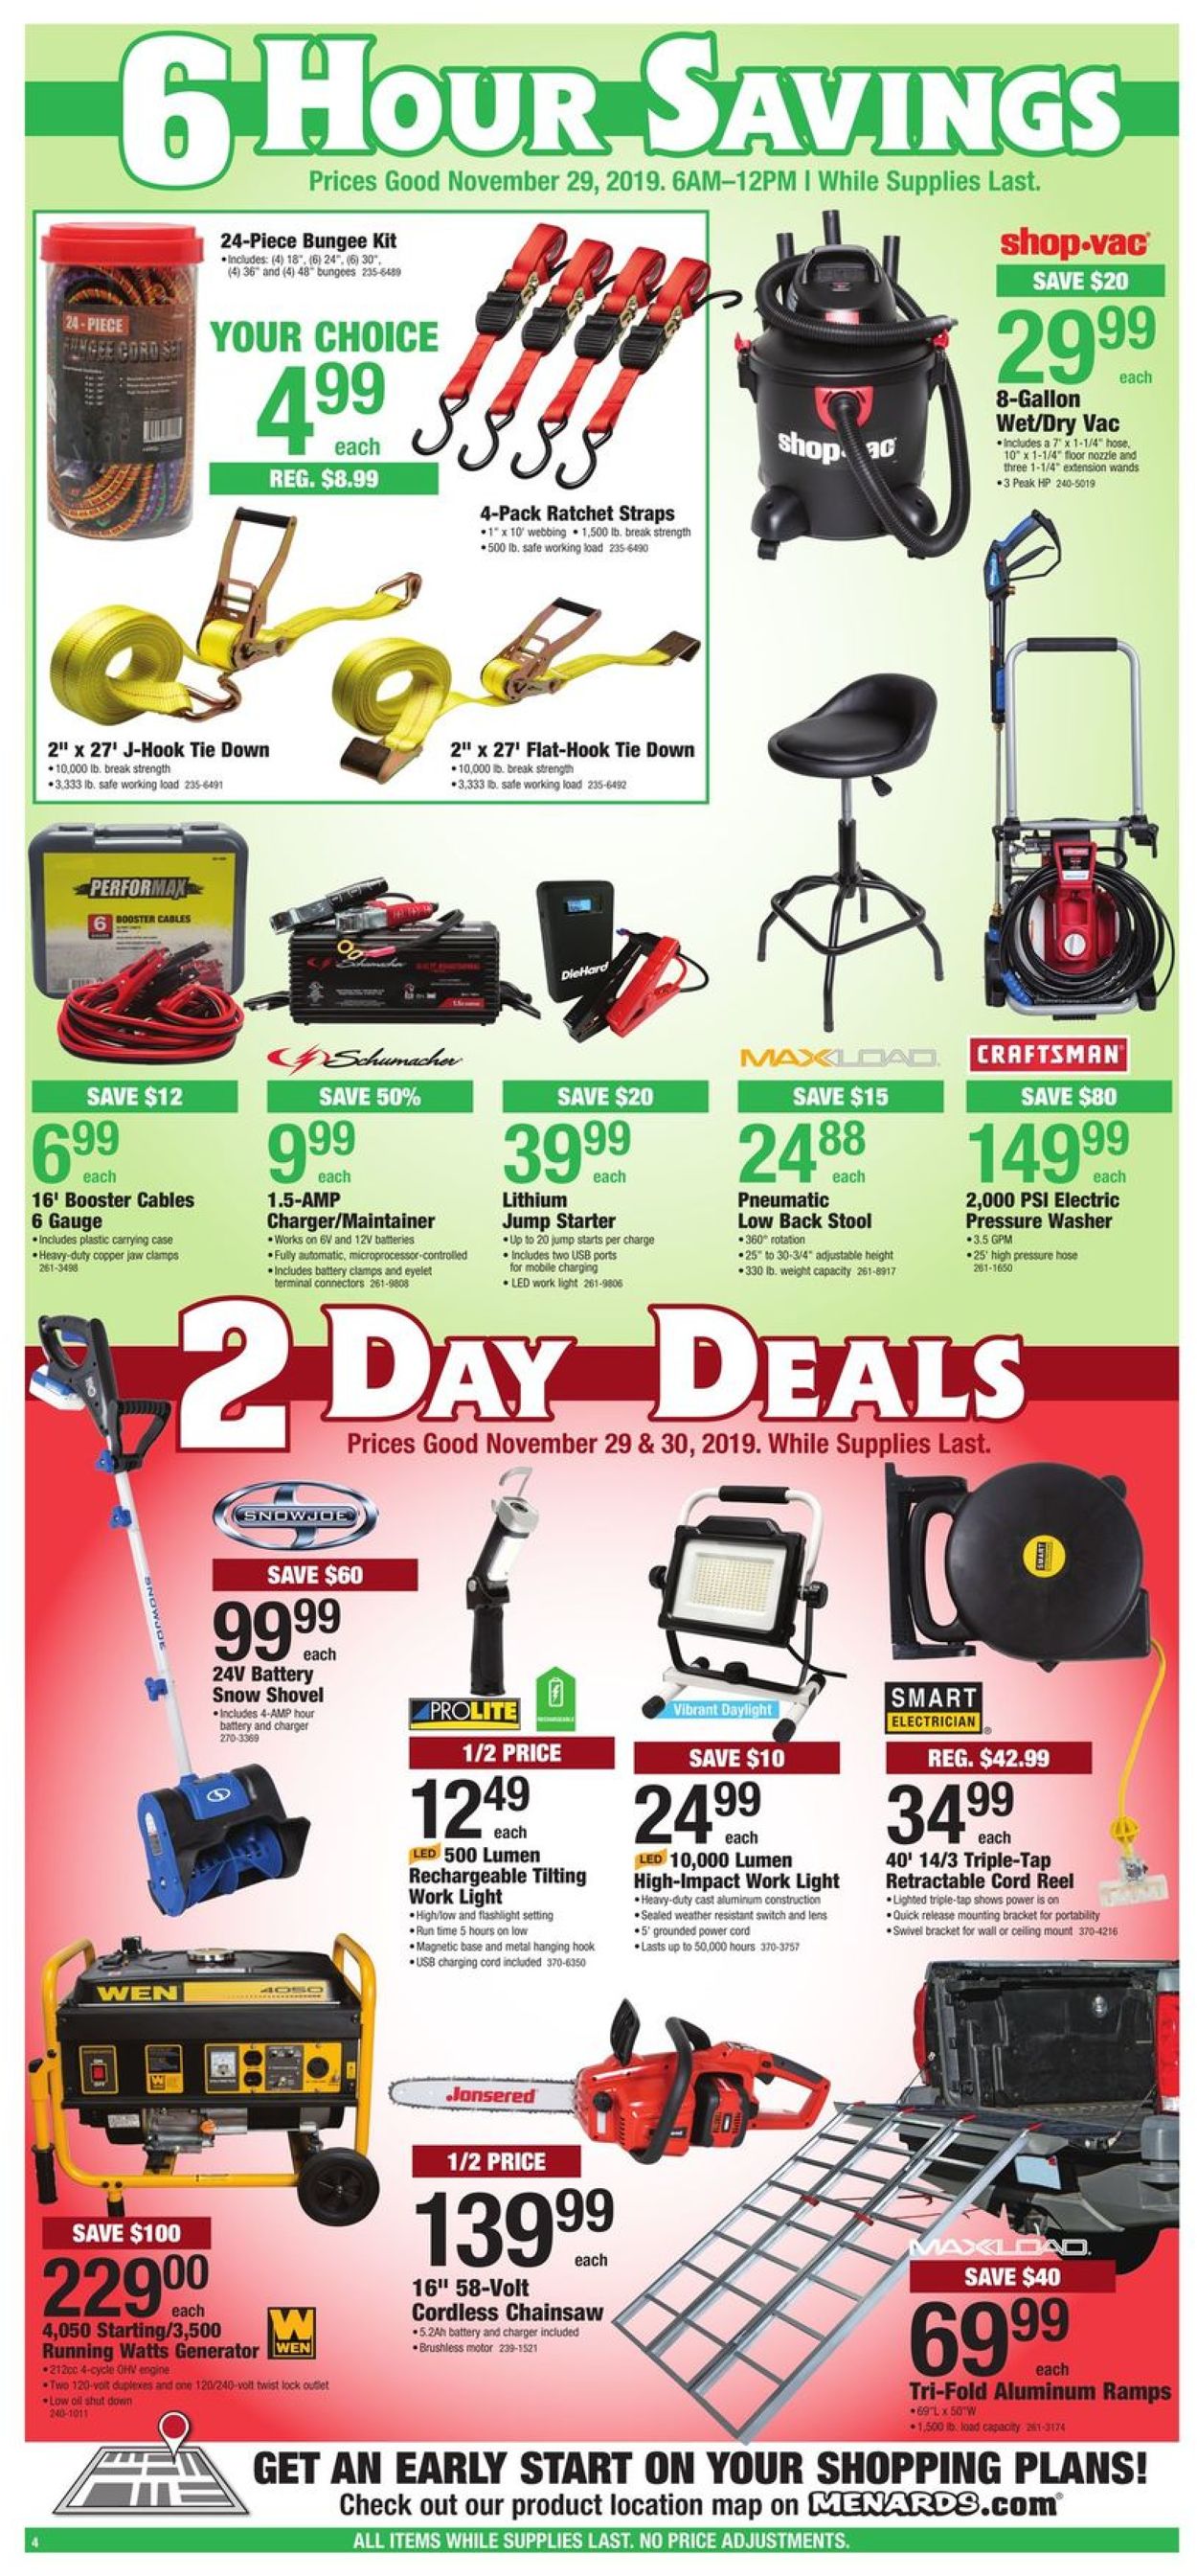 Menards - Black Friday Sale 2019 Current weekly ad 11/29 - 11/30/2019 [5] - 0